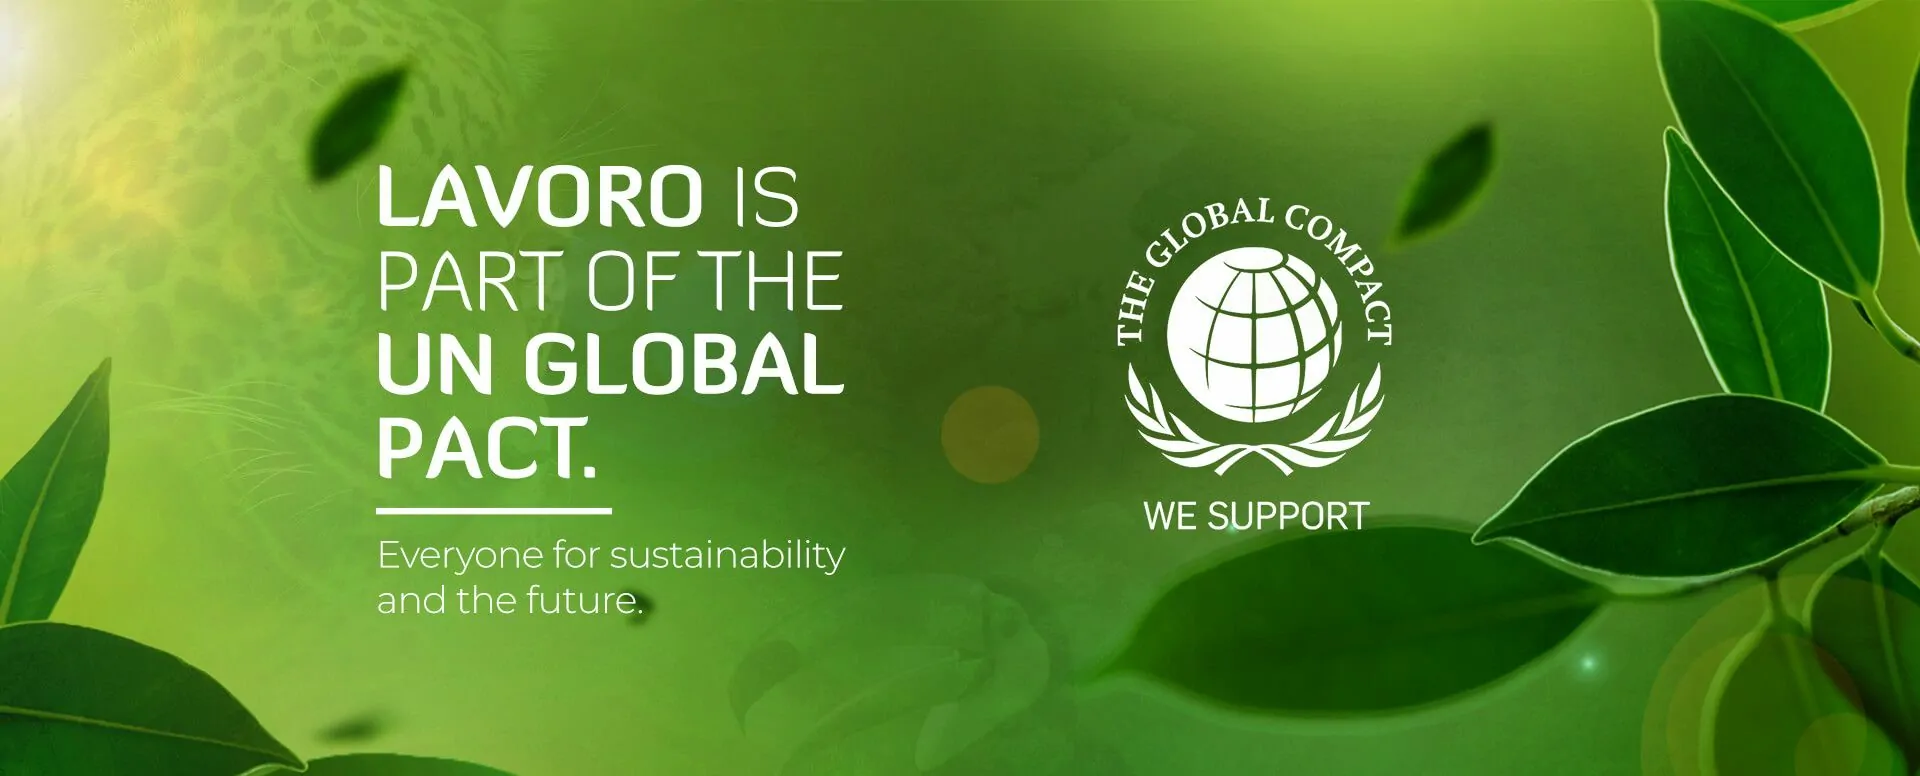 Lavoro is part of the global pact.